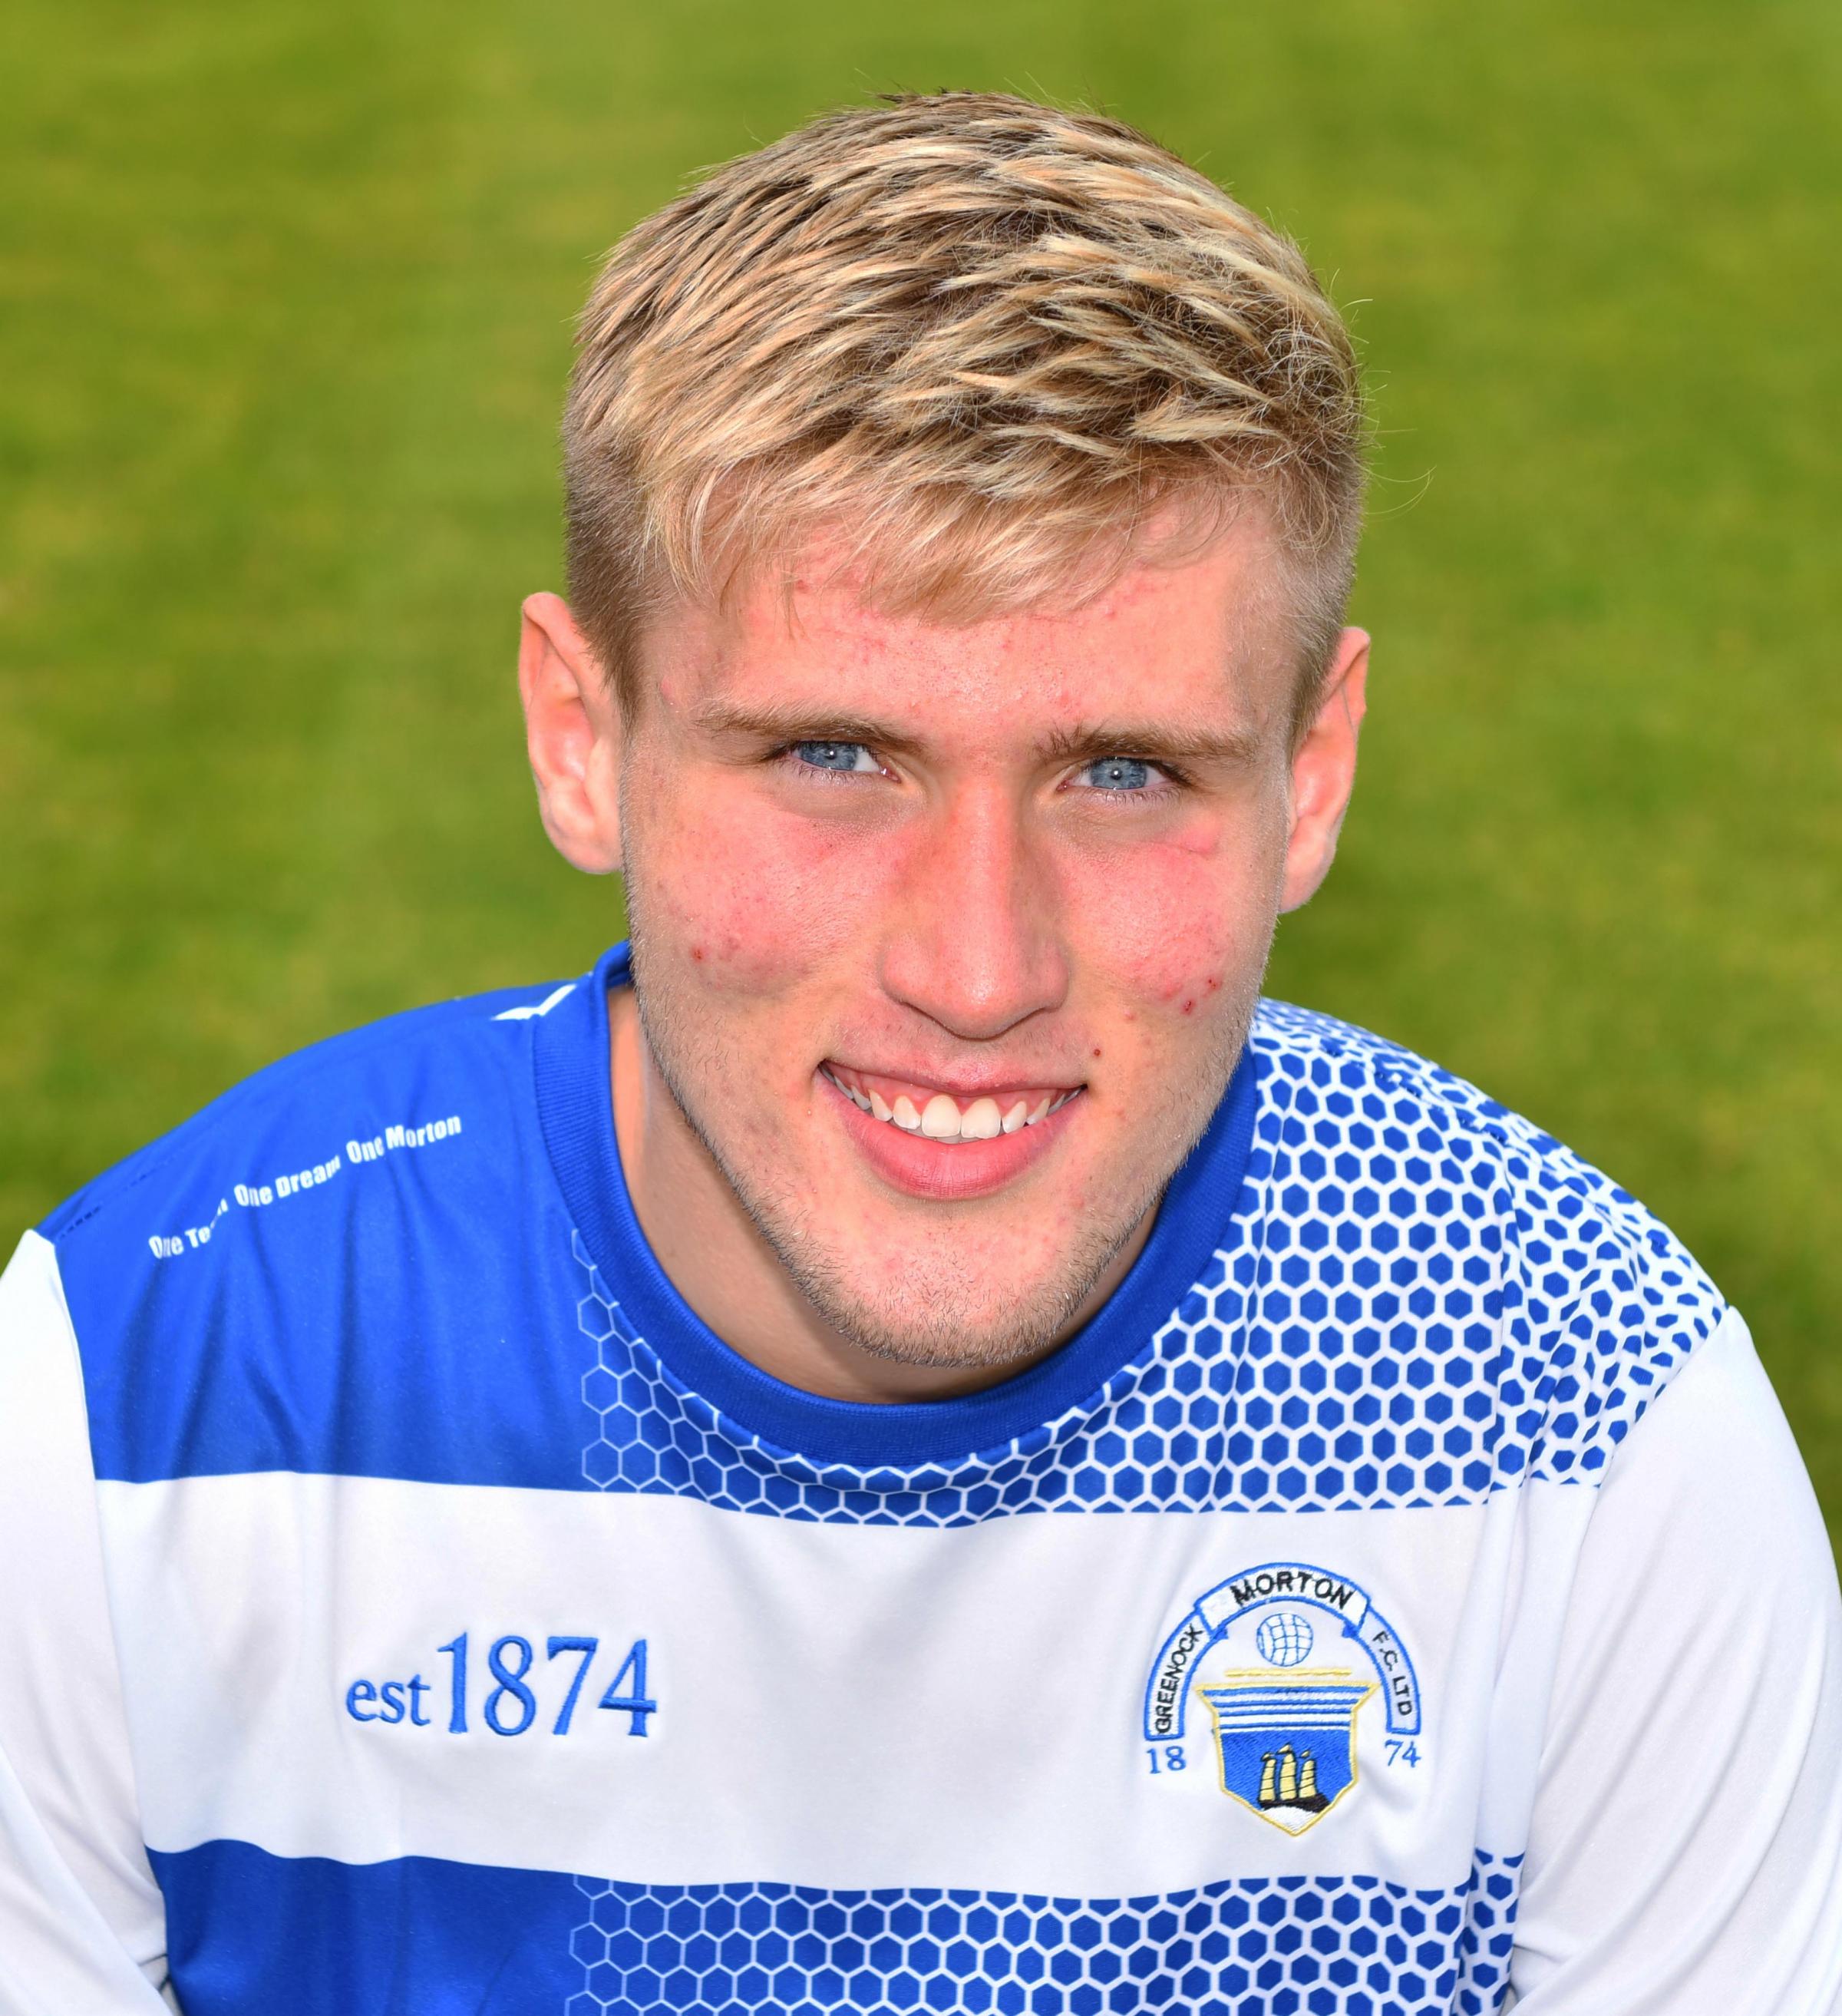 Best of the West: Tony McInally delighted to bring Morton kid to Cumnock